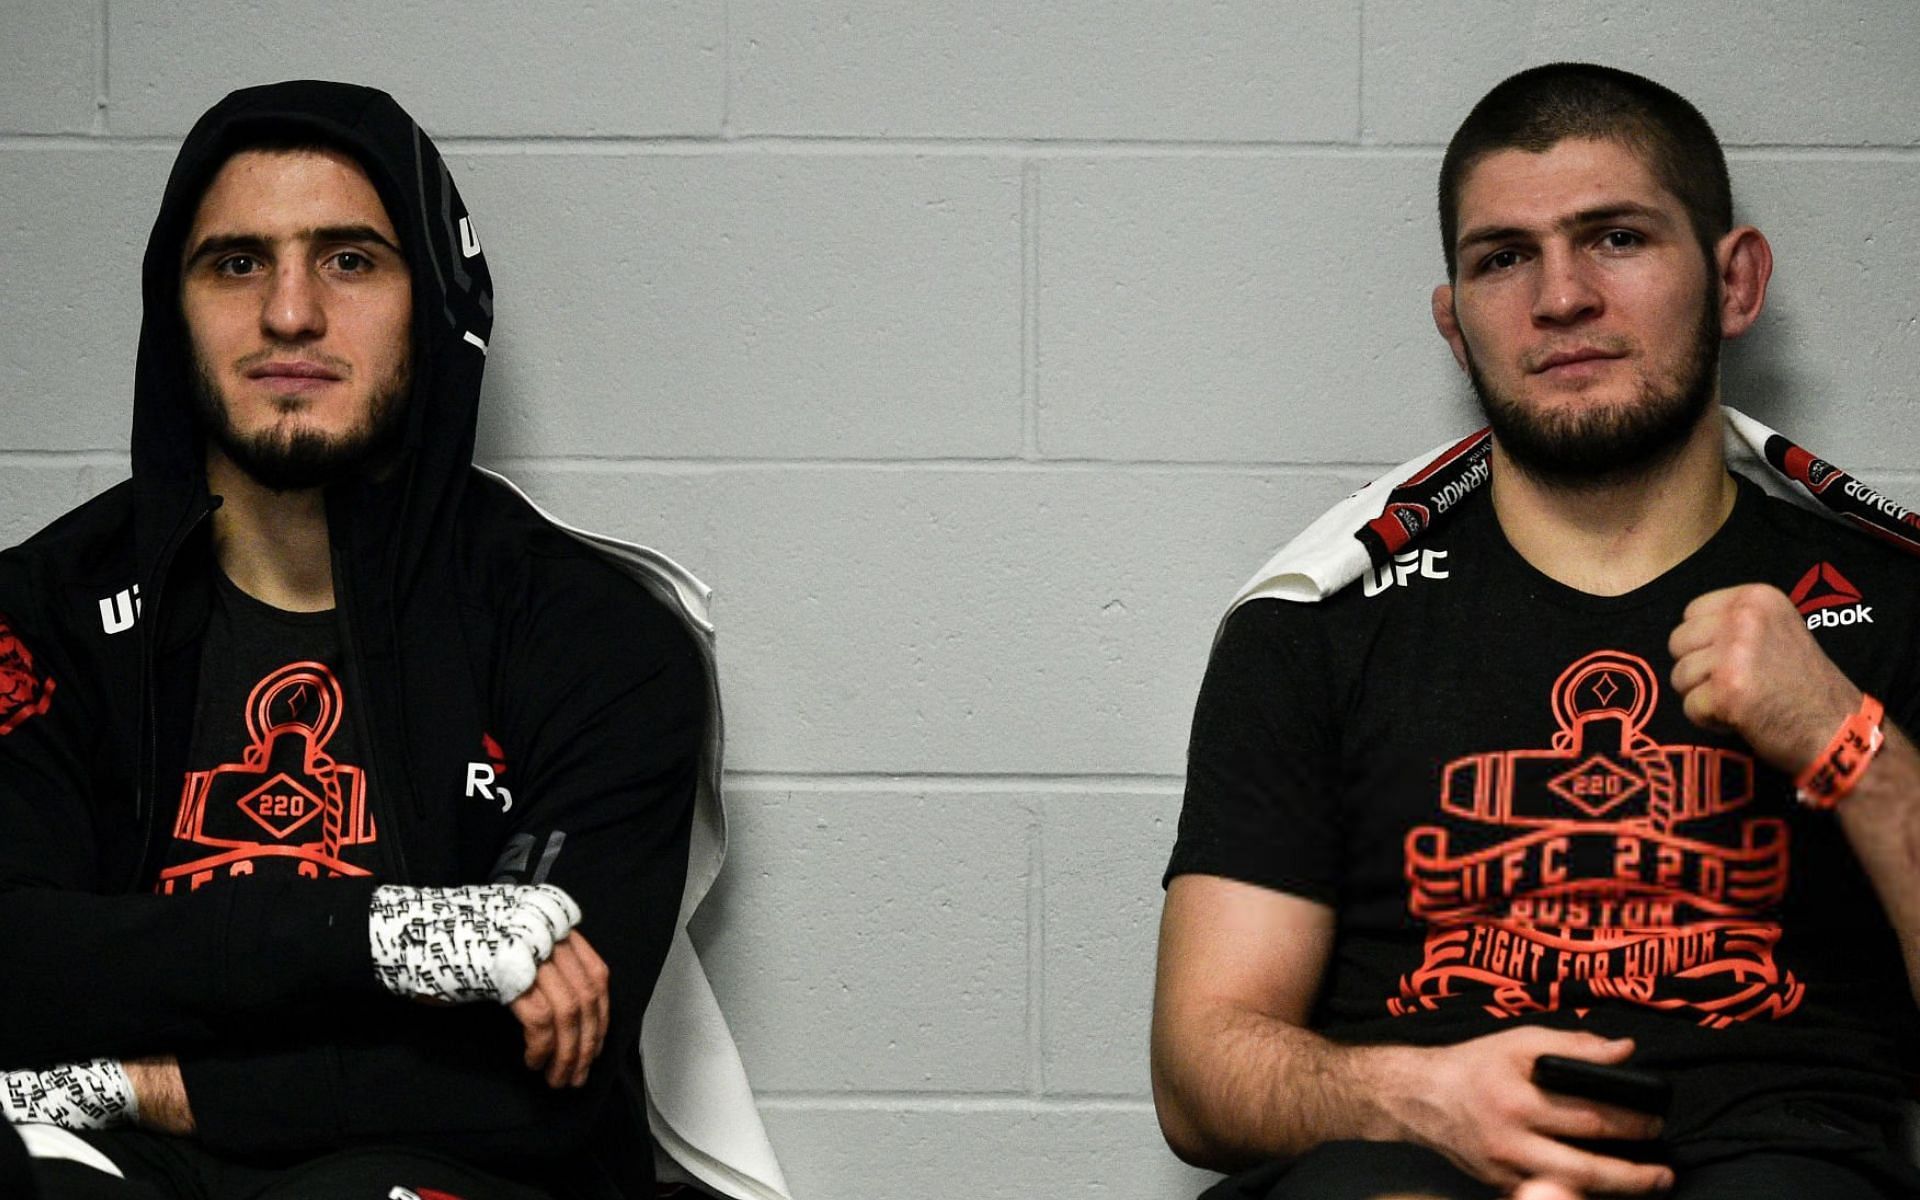 Islam Makhachev (left) and Khabib Nurmagomedov (right) [Image Courtesy: @GettyImages]